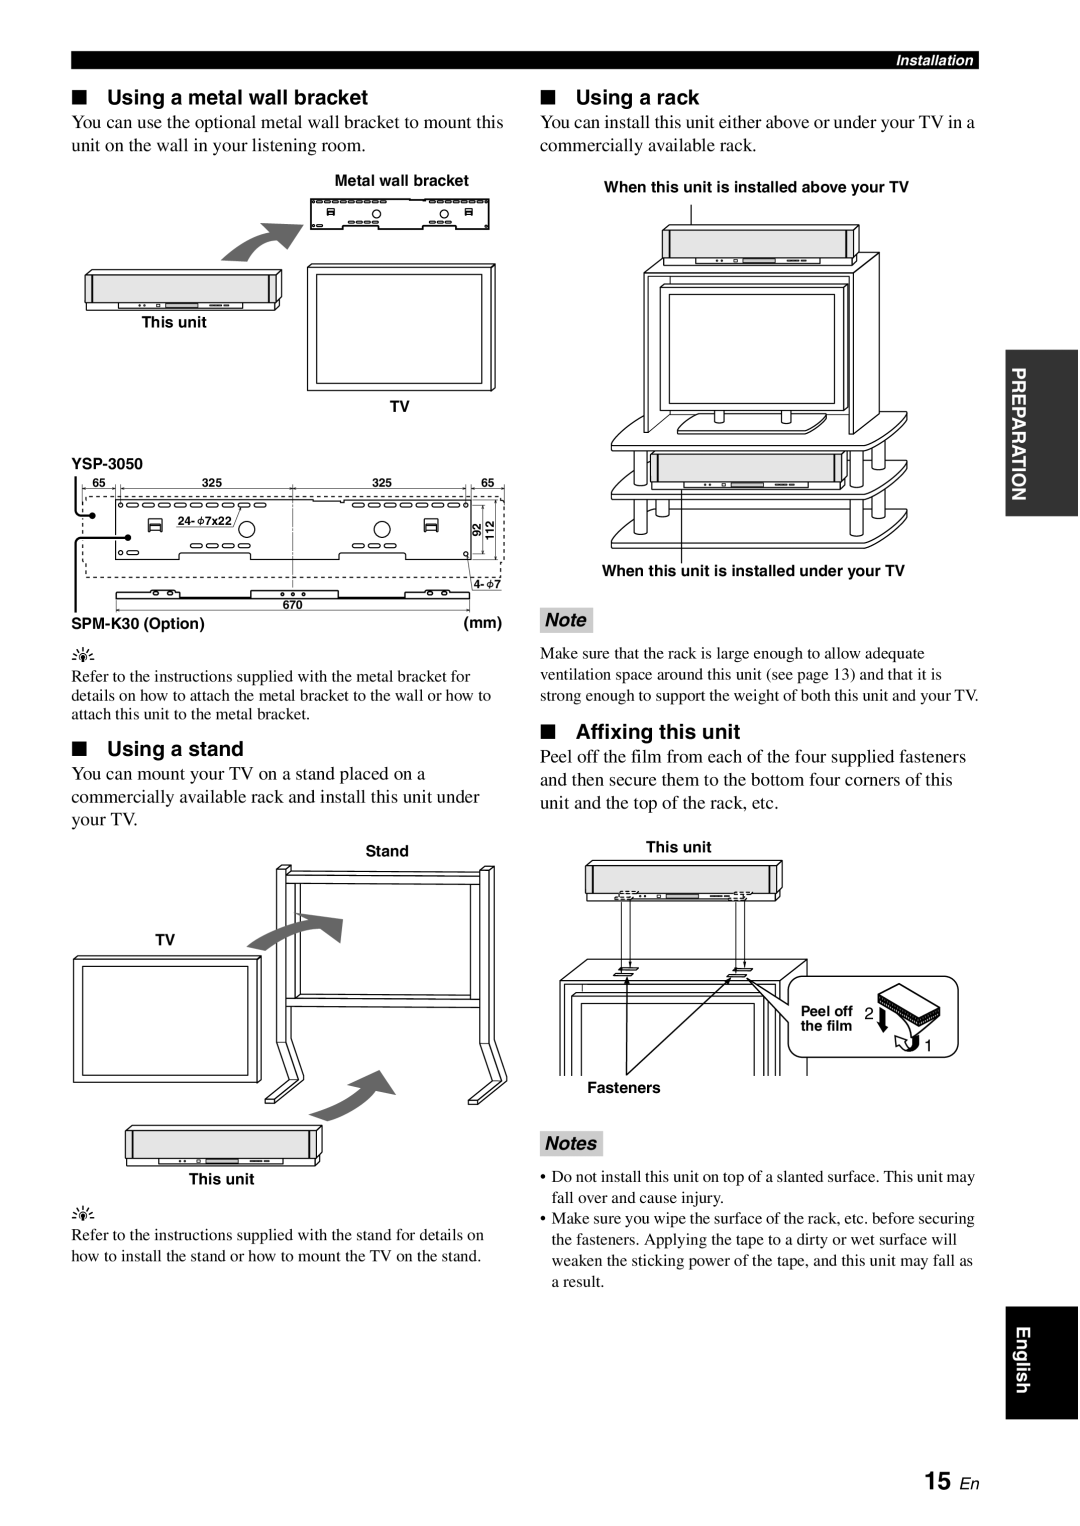 Yamaha YSP-3050 owner manual 15 En, Using a metal wall bracket, Using a rack, Using a stand, Affixing this unit, Notes 